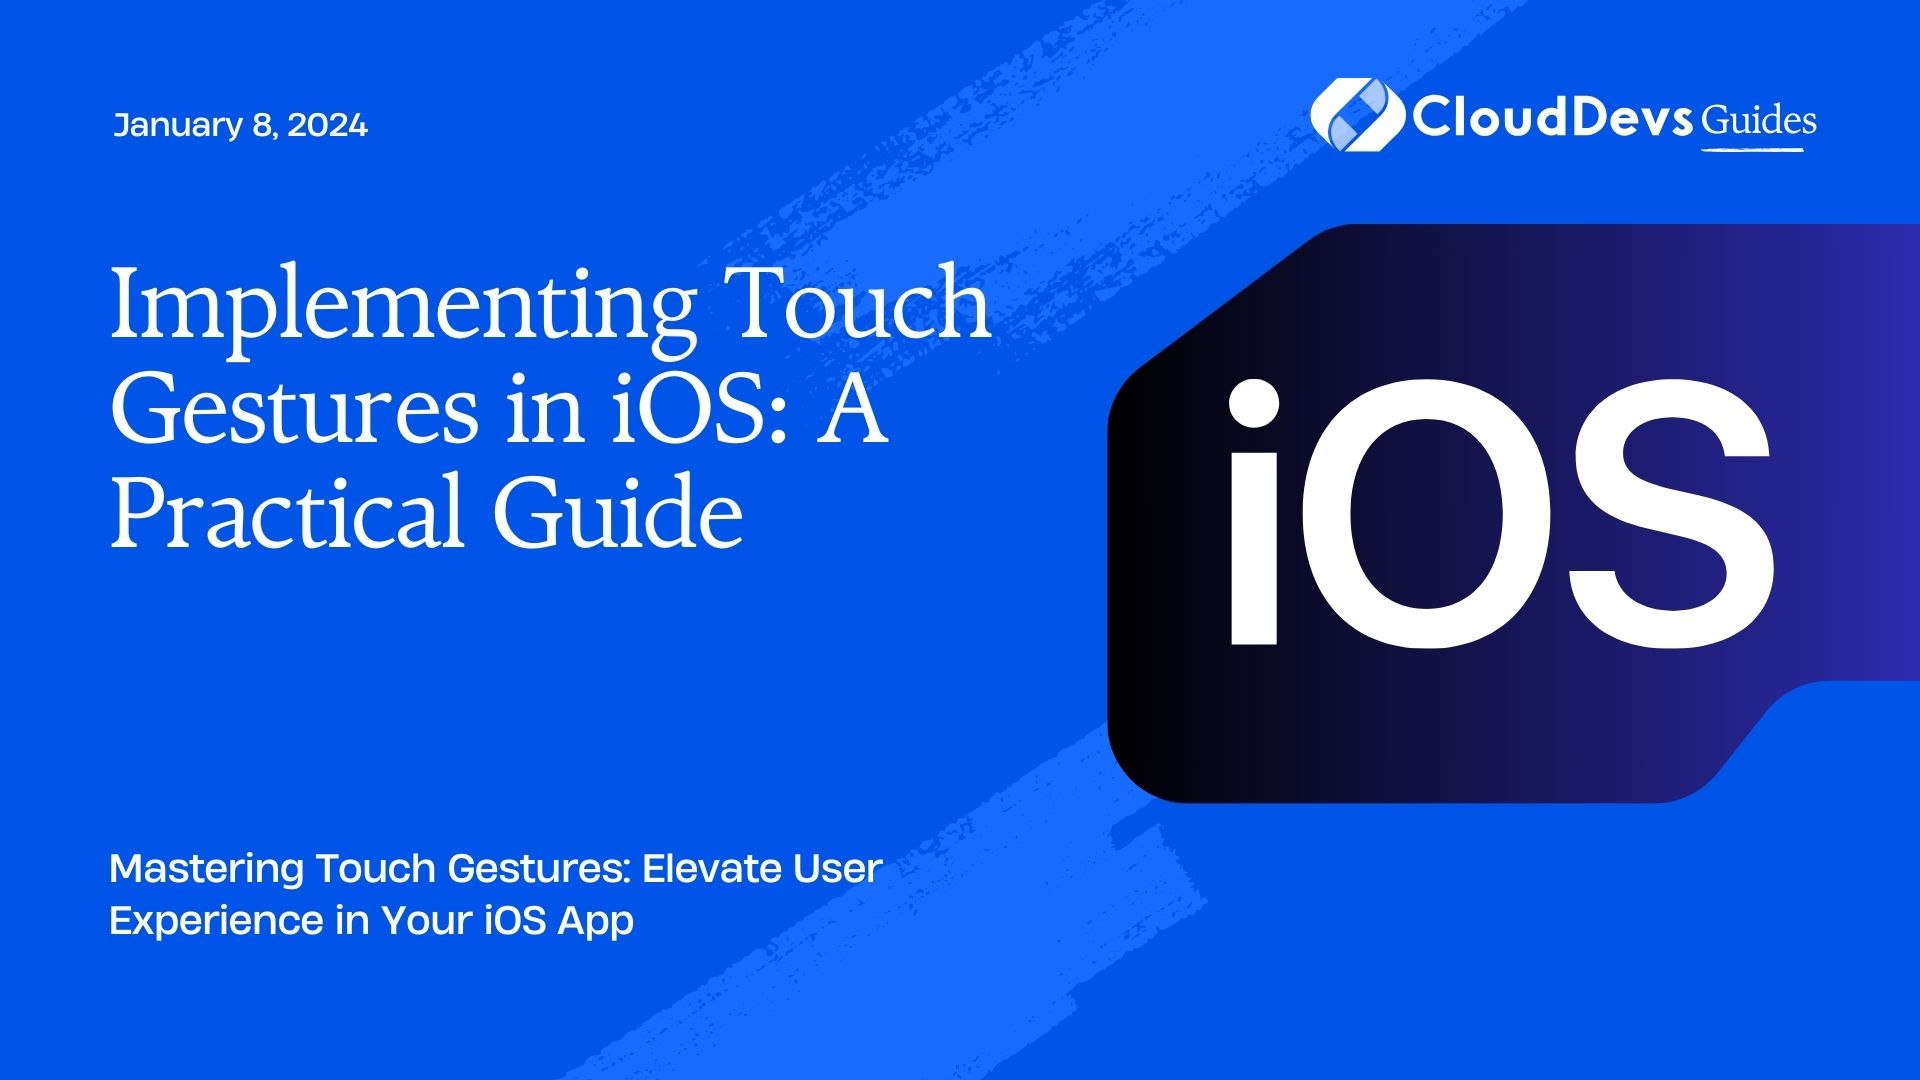 Implementing Touch Gestures in iOS: A Practical Guide